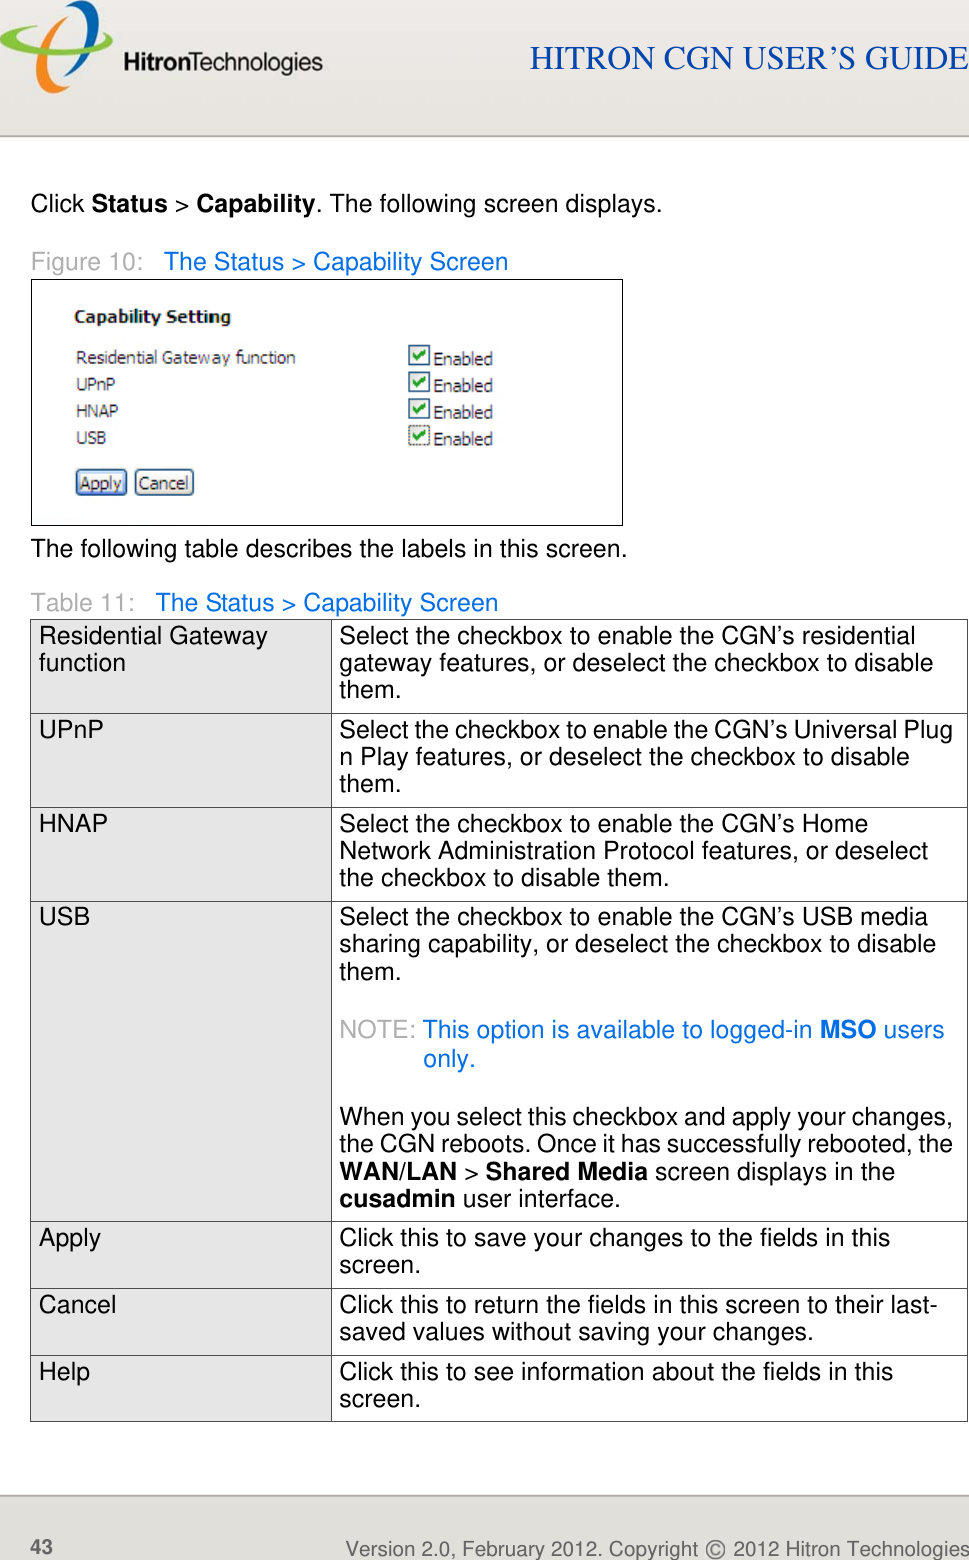 STATUSVersion 2.0, February 2012. Copyright   2012 Hitron Technologies43Version 2.0, February 2012. Copyright   2012 Hitron Technologies43HITRON CGN USER’S GUIDEClick Status &gt; Capability. The following screen displays.Figure 10:   The Status &gt; Capability ScreenThe following table describes the labels in this screen.Table 11:   The Status &gt; Capability ScreenResidential Gateway functionSelect the checkbox to enable the CGN’s residential gateway features, or deselect the checkbox to disable them.UPnP Select the checkbox to enable the CGN’s Universal Plug n Play features, or deselect the checkbox to disable them.HNAP Select the checkbox to enable the CGN’s Home Network Administration Protocol features, or deselect the checkbox to disable them.USB Select the checkbox to enable the CGN’s USB media sharing capability, or deselect the checkbox to disable them.NOTE: This option is available to logged-in MSO users only.When you select this checkbox and apply your changes, the CGN reboots. Once it has successfully rebooted, the WAN/LAN &gt; Shared Media screen displays in the cusadmin user interface.Apply Click this to save your changes to the fields in this screen.Cancel Click this to return the fields in this screen to their last-saved values without saving your changes.Help Click this to see information about the fields in this screen.